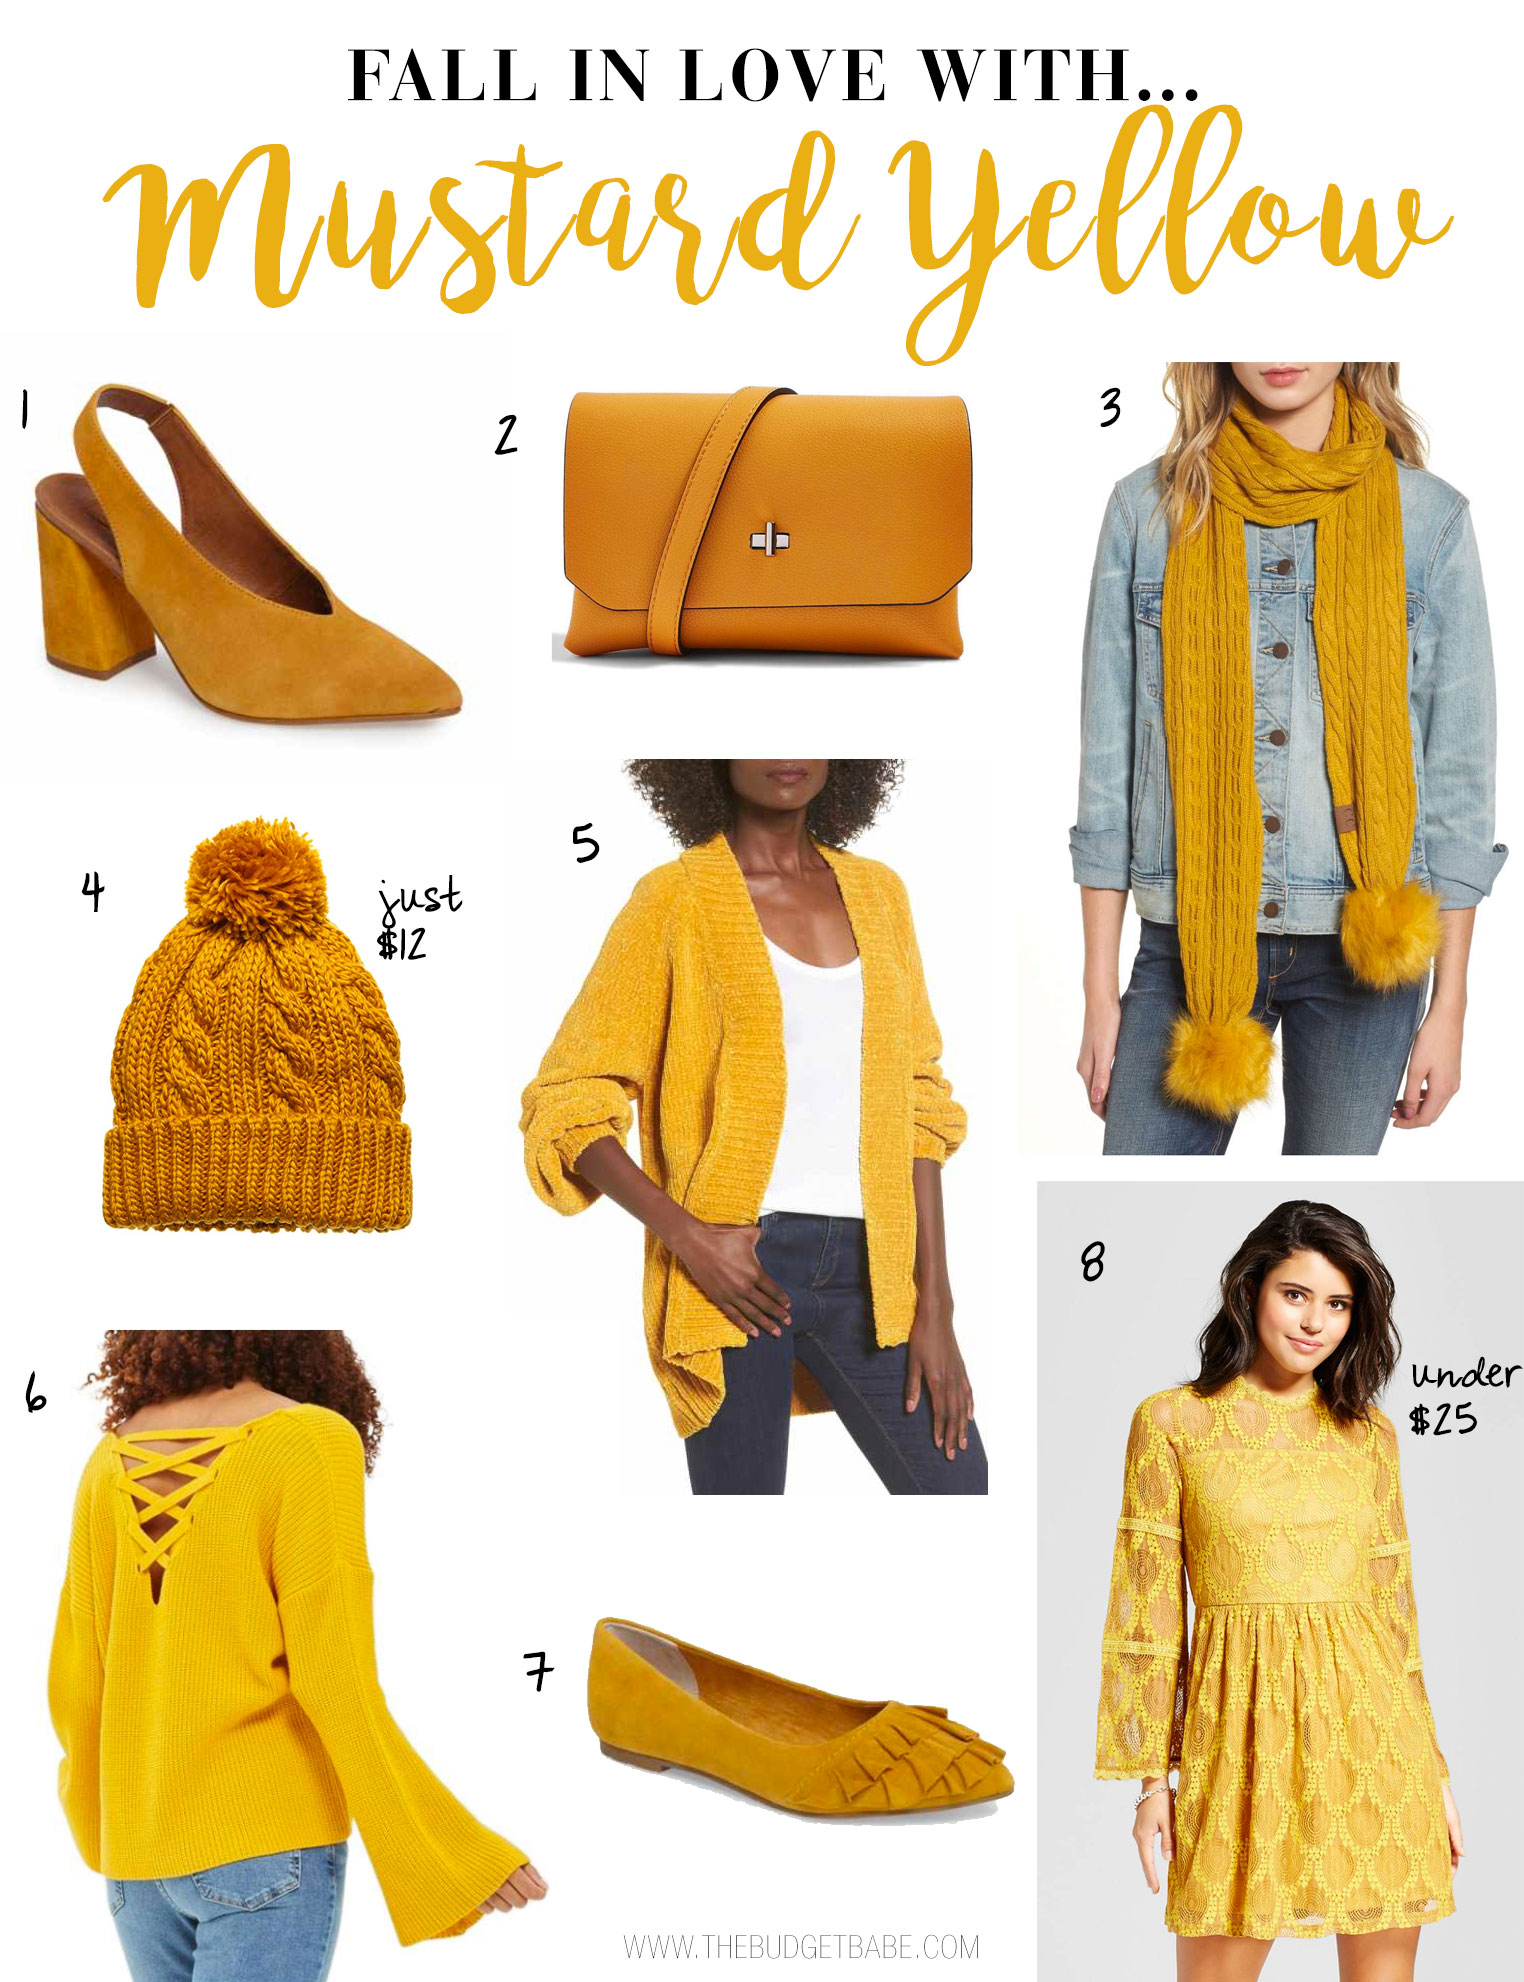 Mustard yellow is the perfect hue to wear for fall 2017.